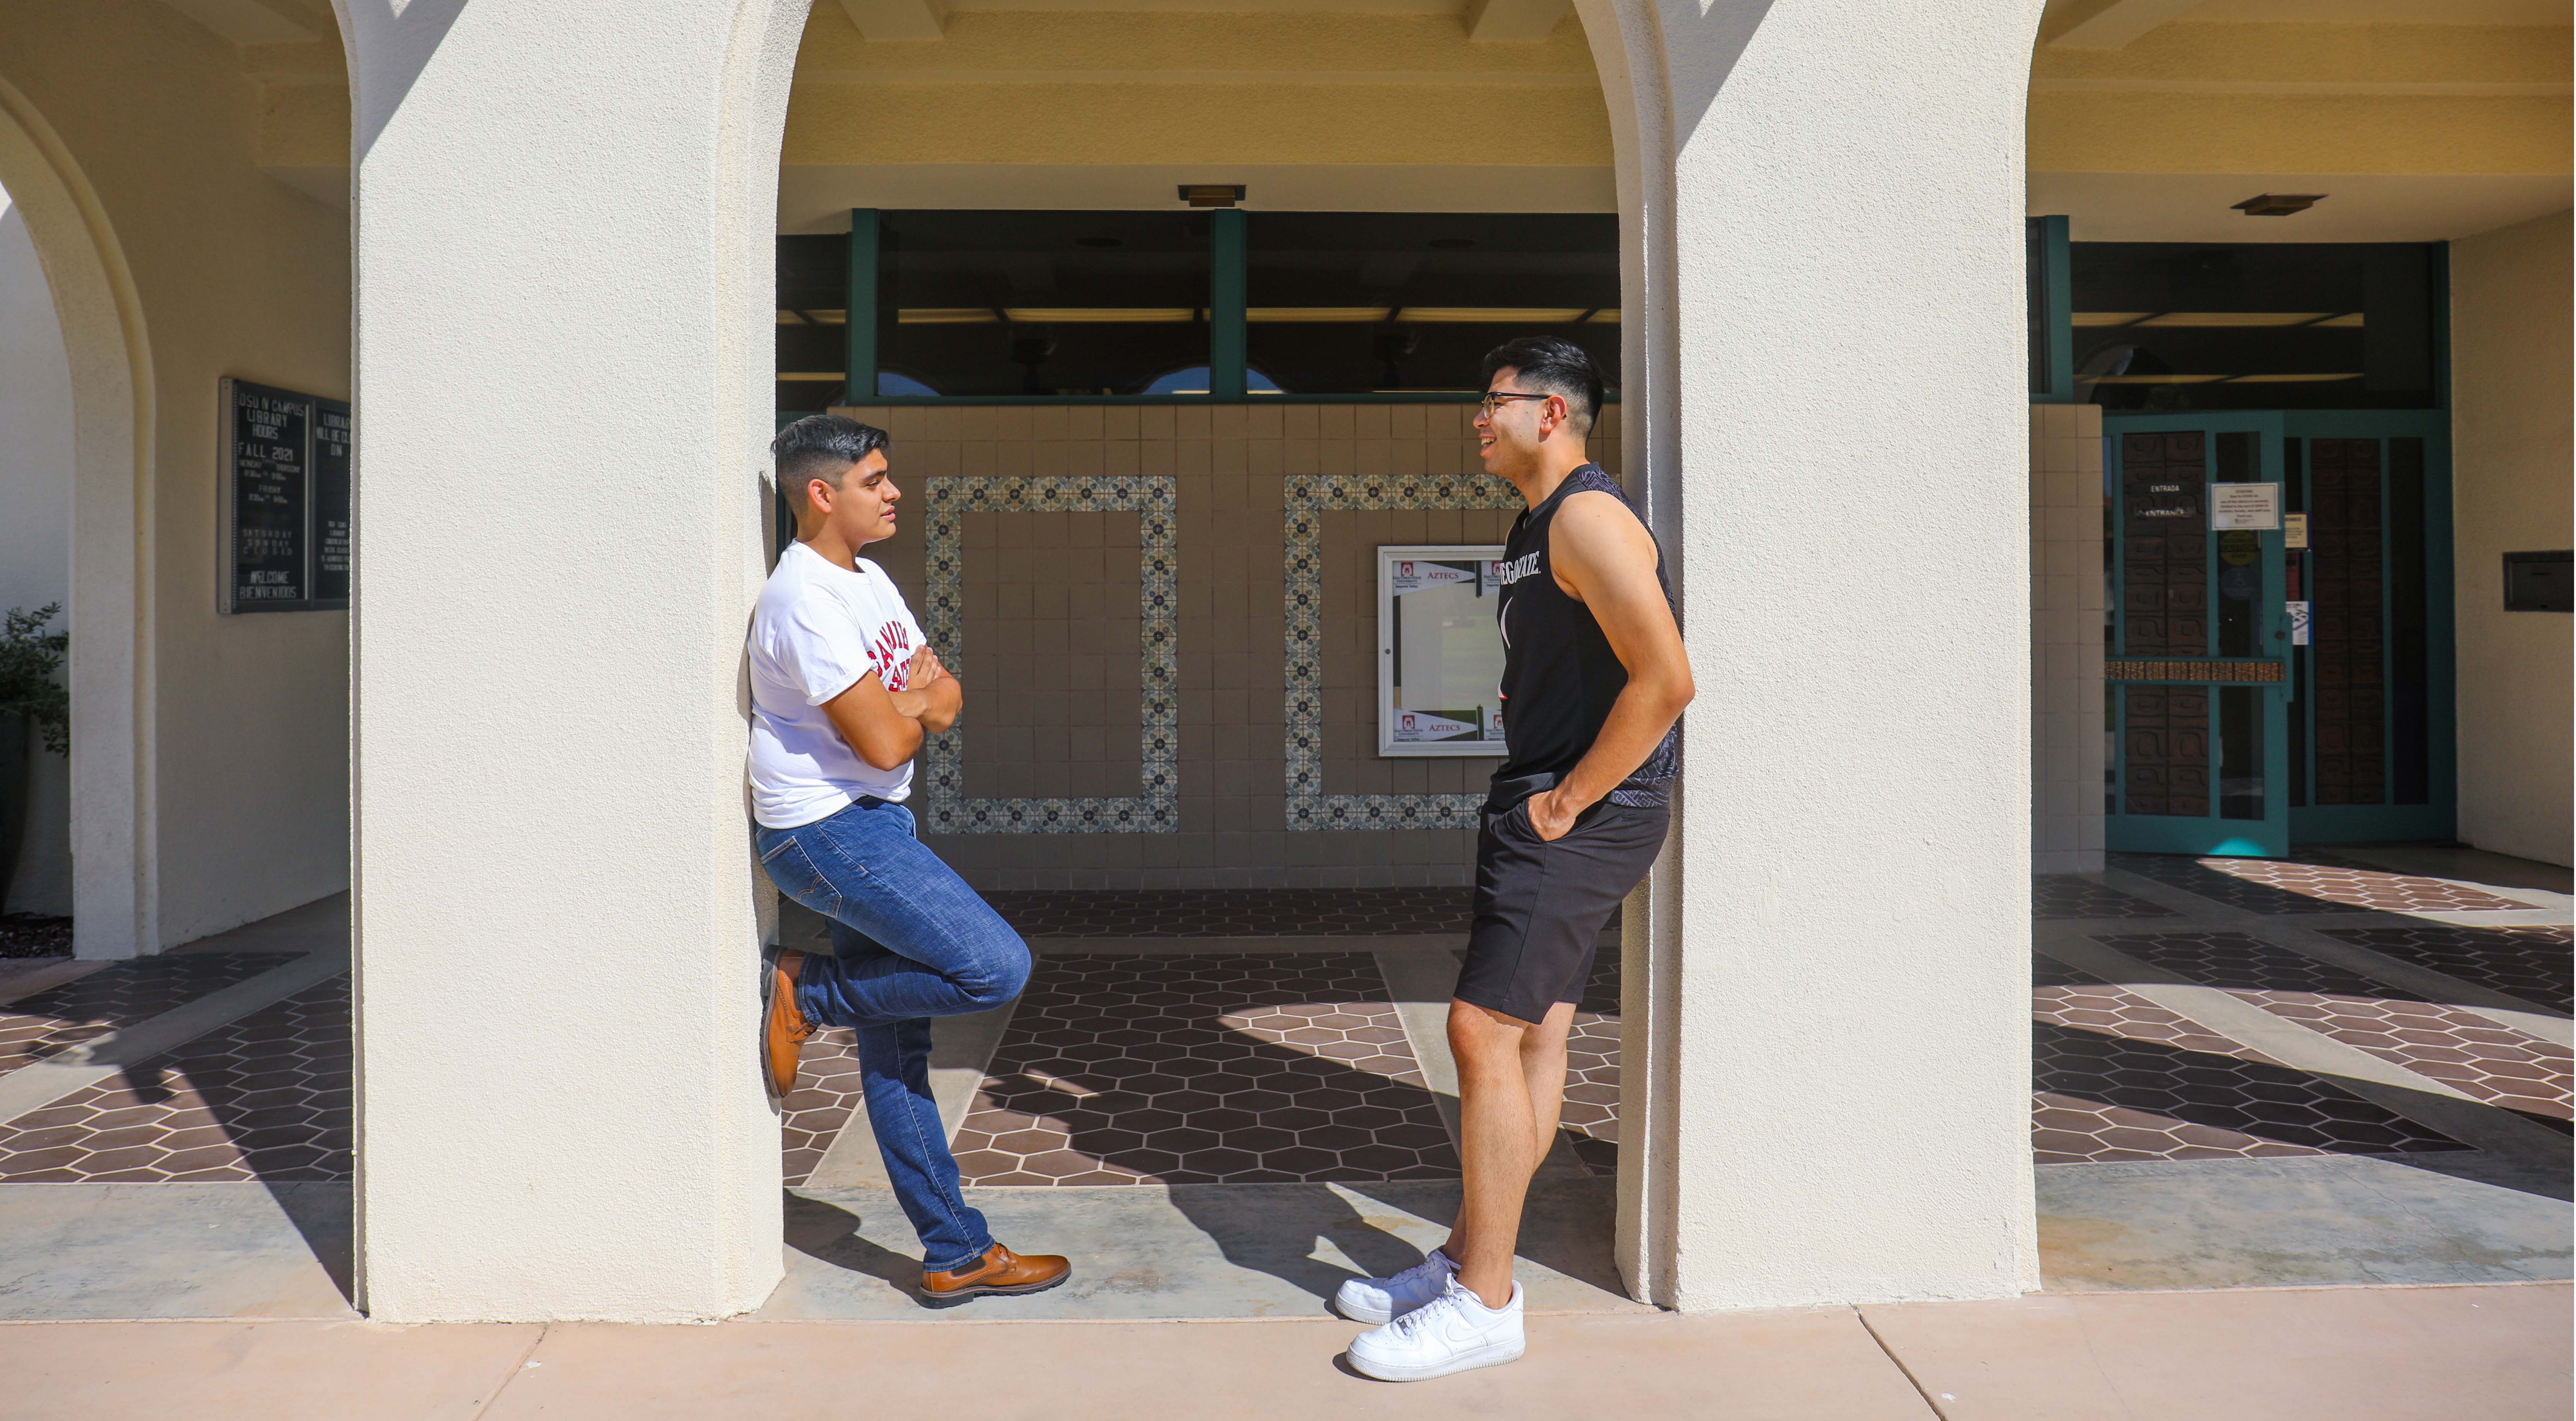 Students chatted outside the SDSU Imperial Valley library entrance. (Photo: Scott Hargrove)